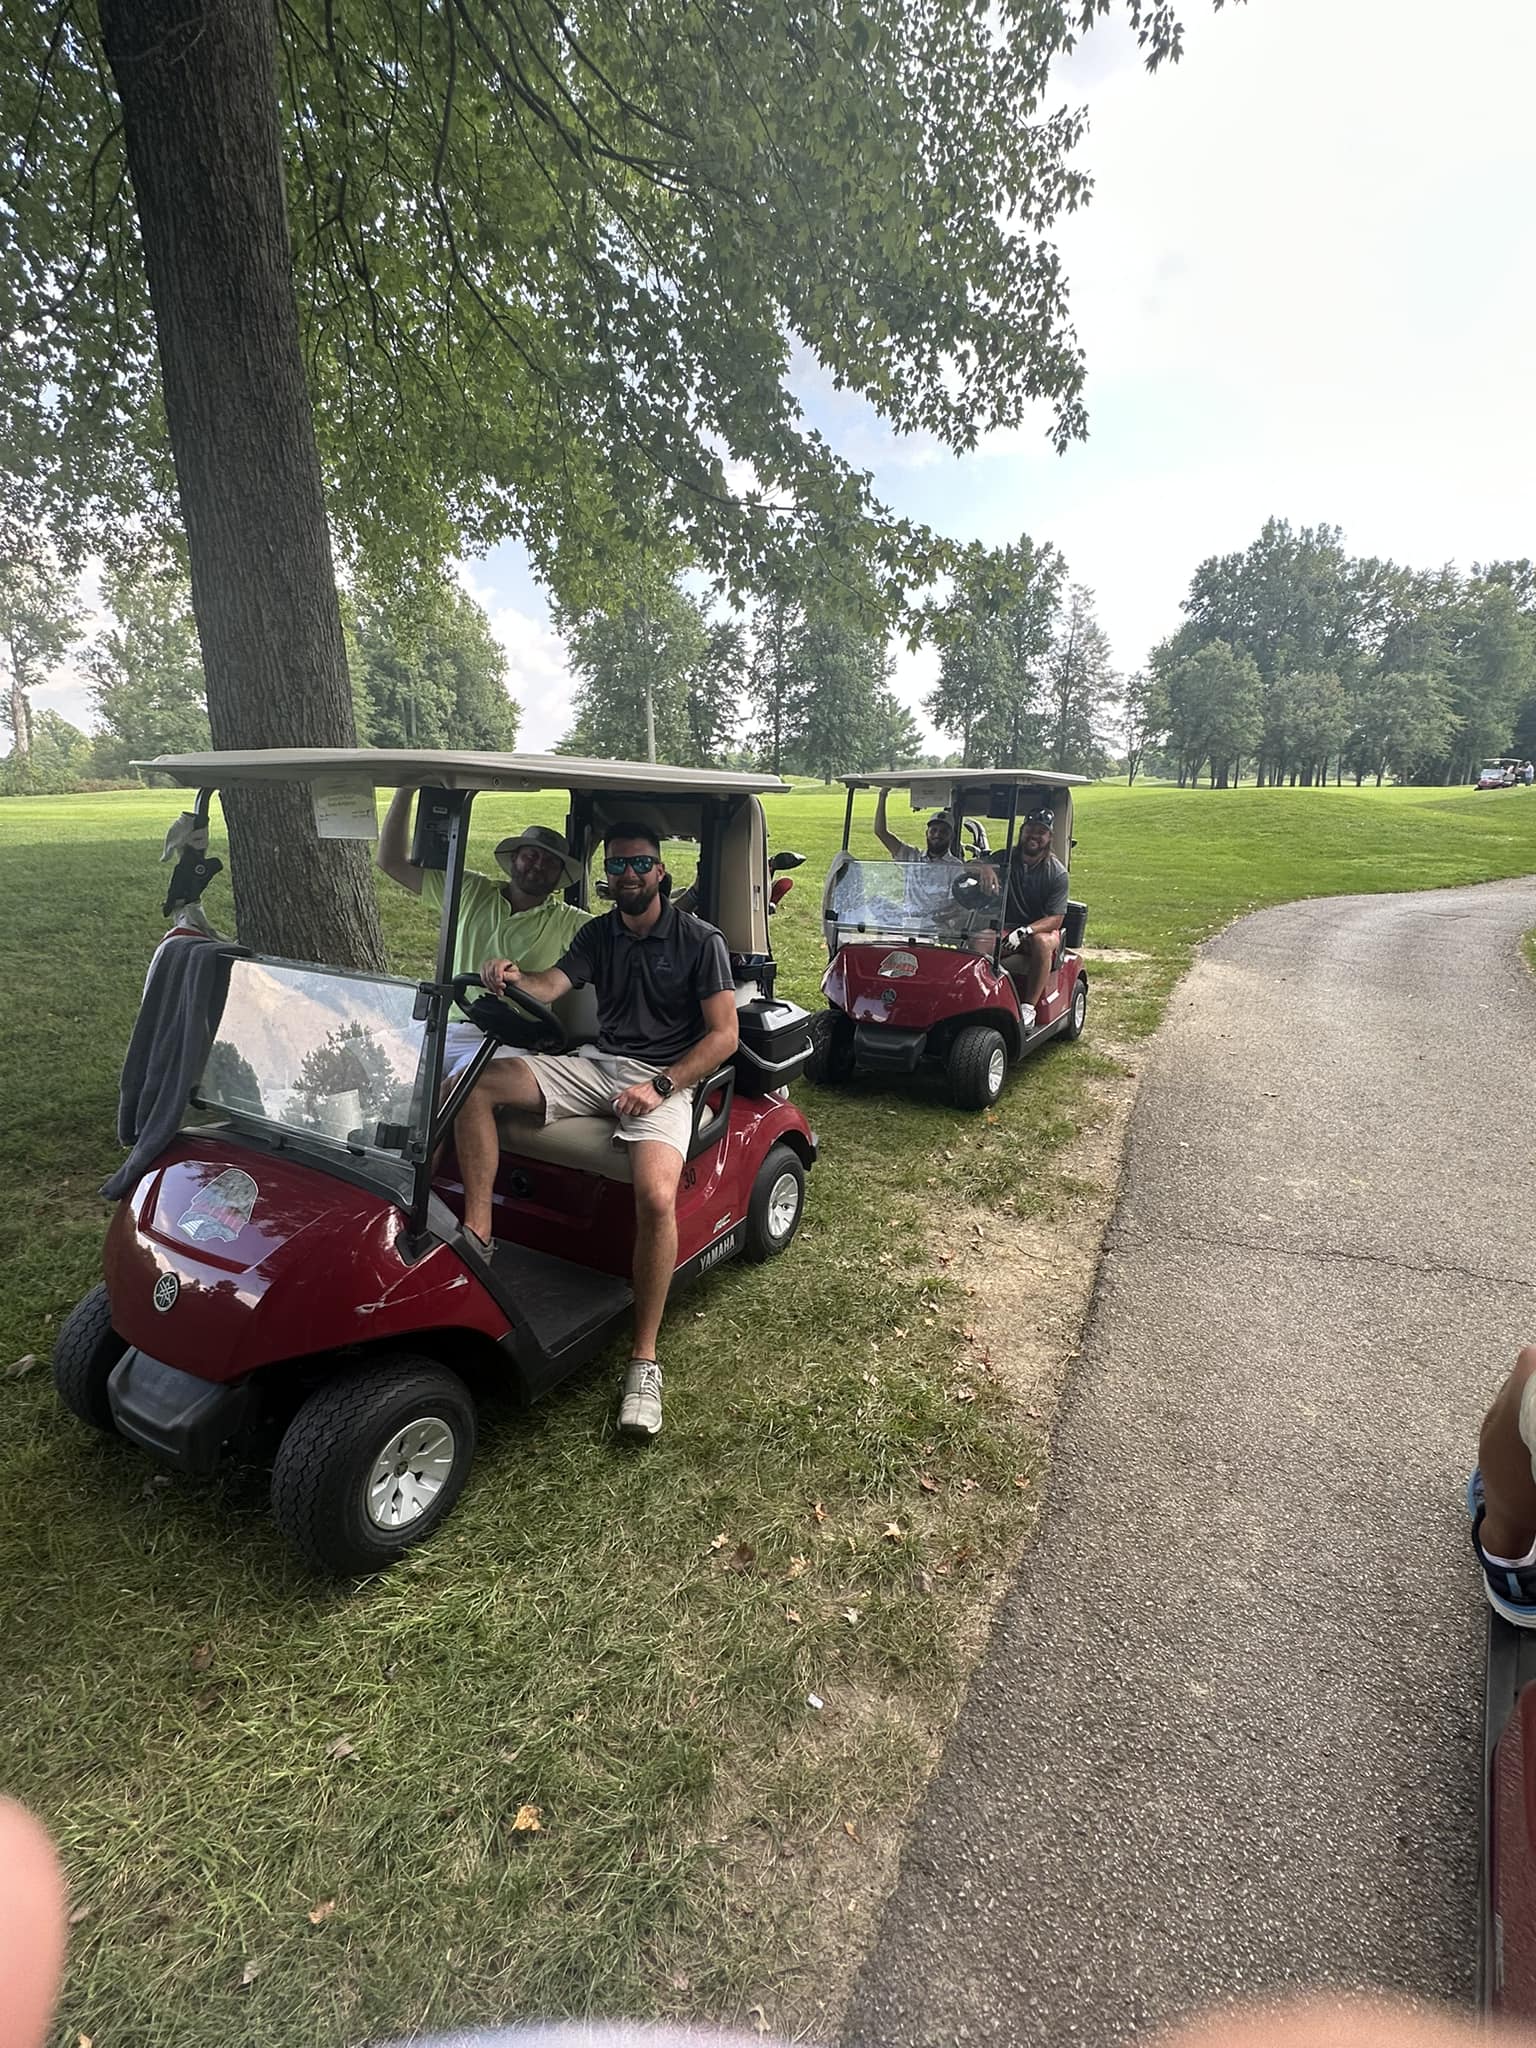 Two golfers sitting in a golf cart smiling at the camera.